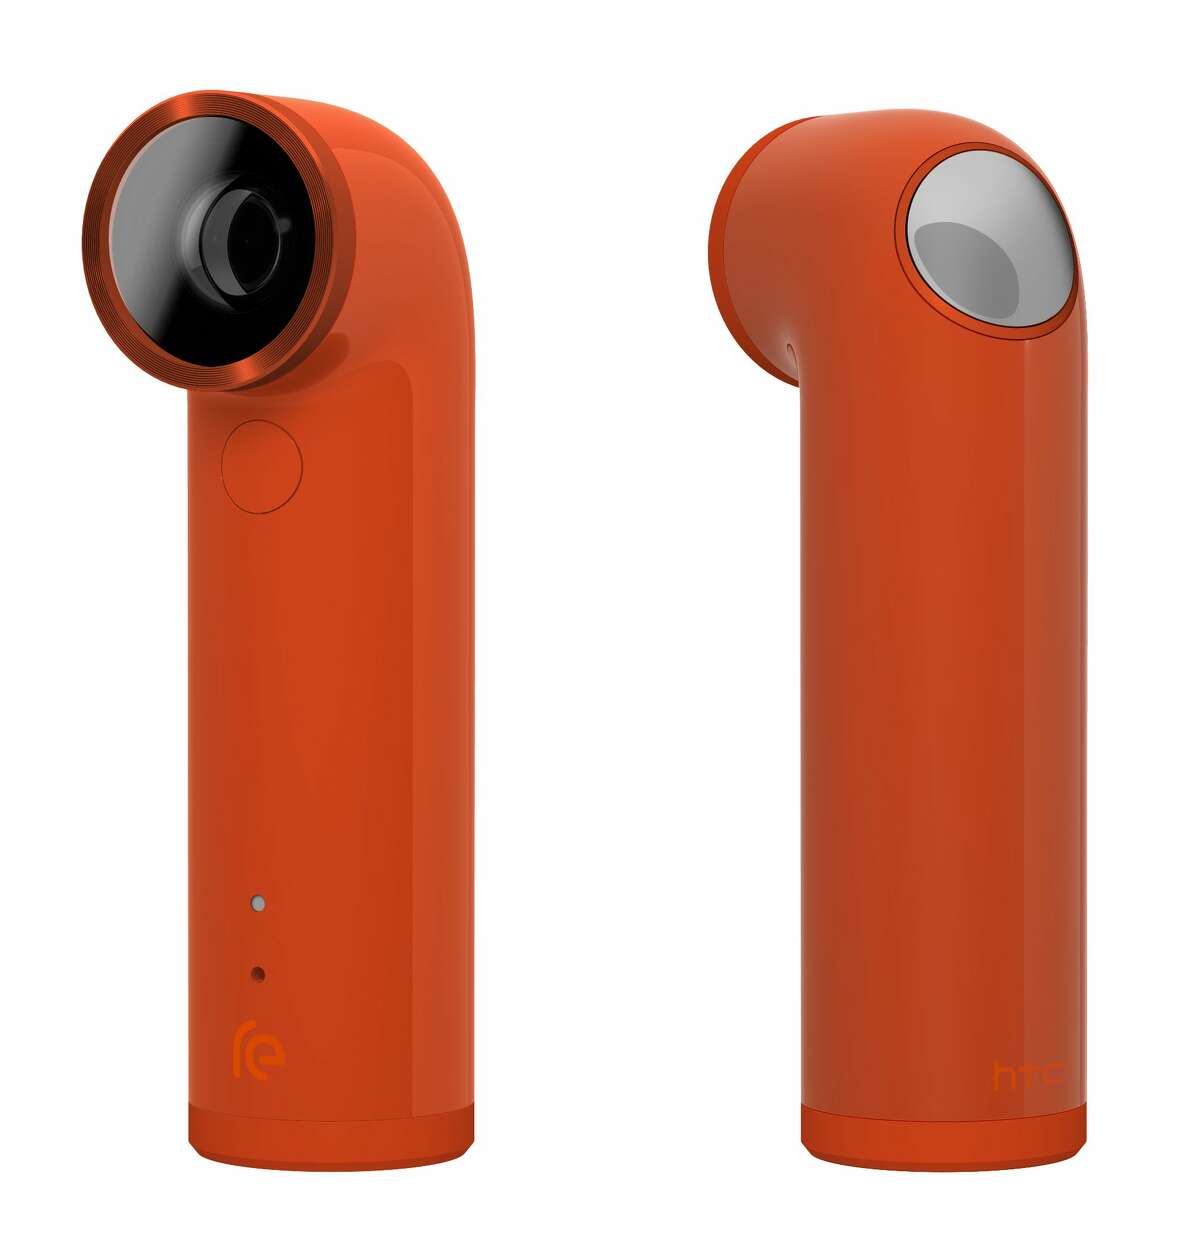 This product image provided by HTC shows the company’s new Re camera.